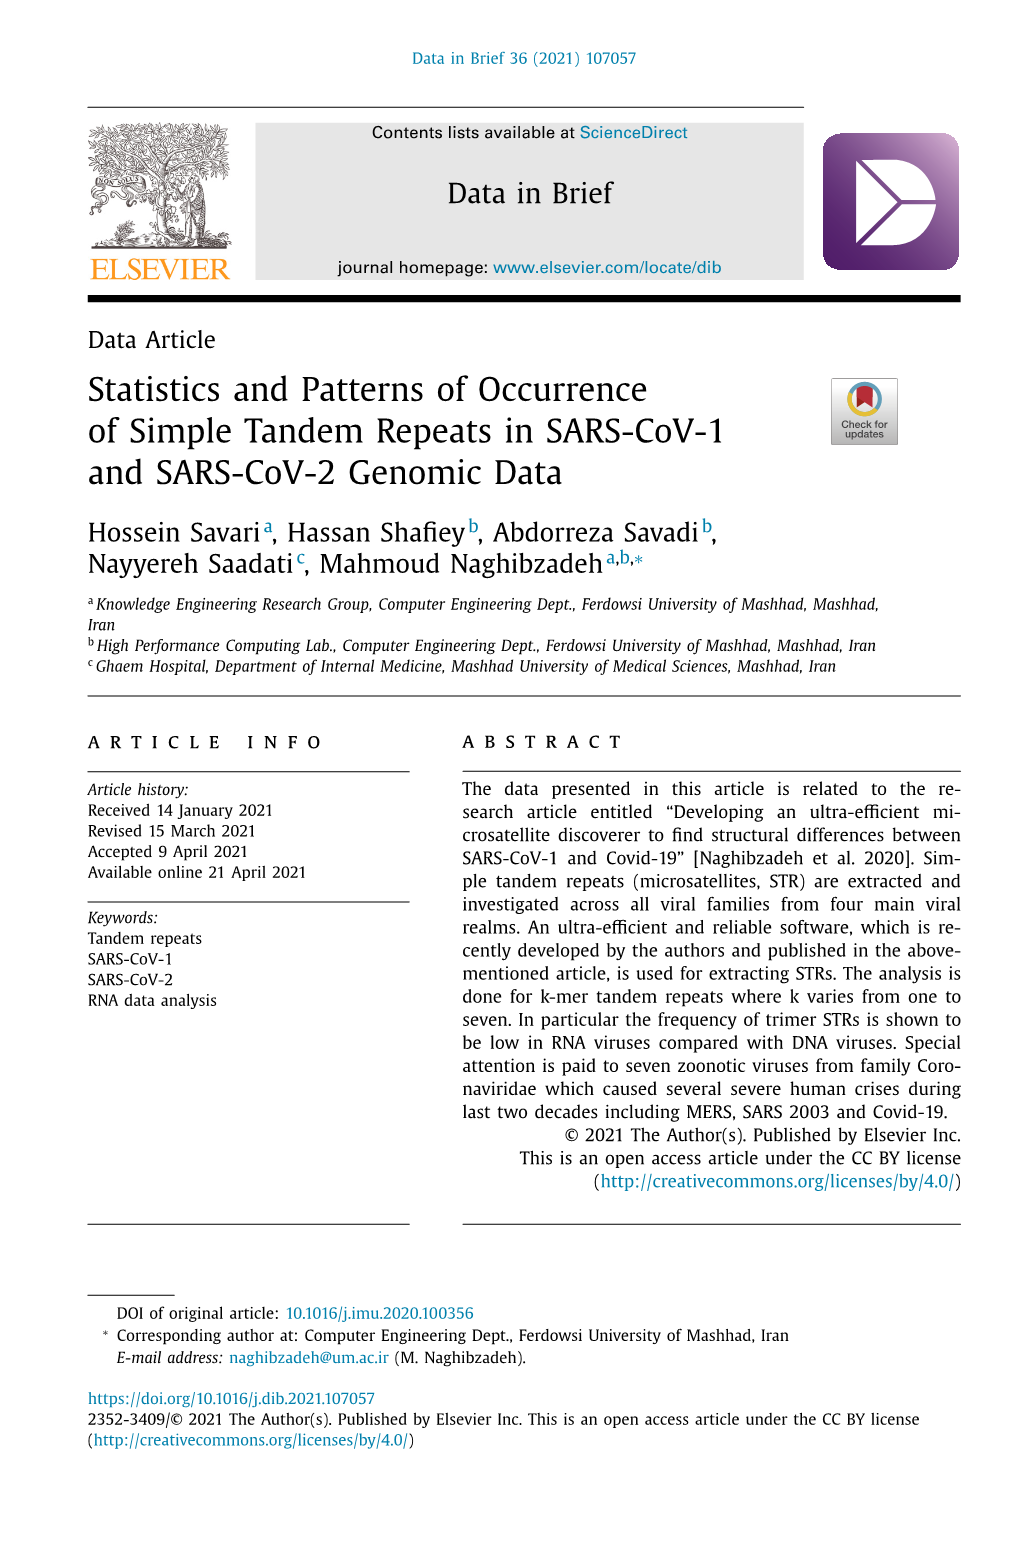 Statistics and Patterns of Occurrence of Simple Tandem Repeats in SARS-Cov-1 and SARS-Cov-2 Genomic Data